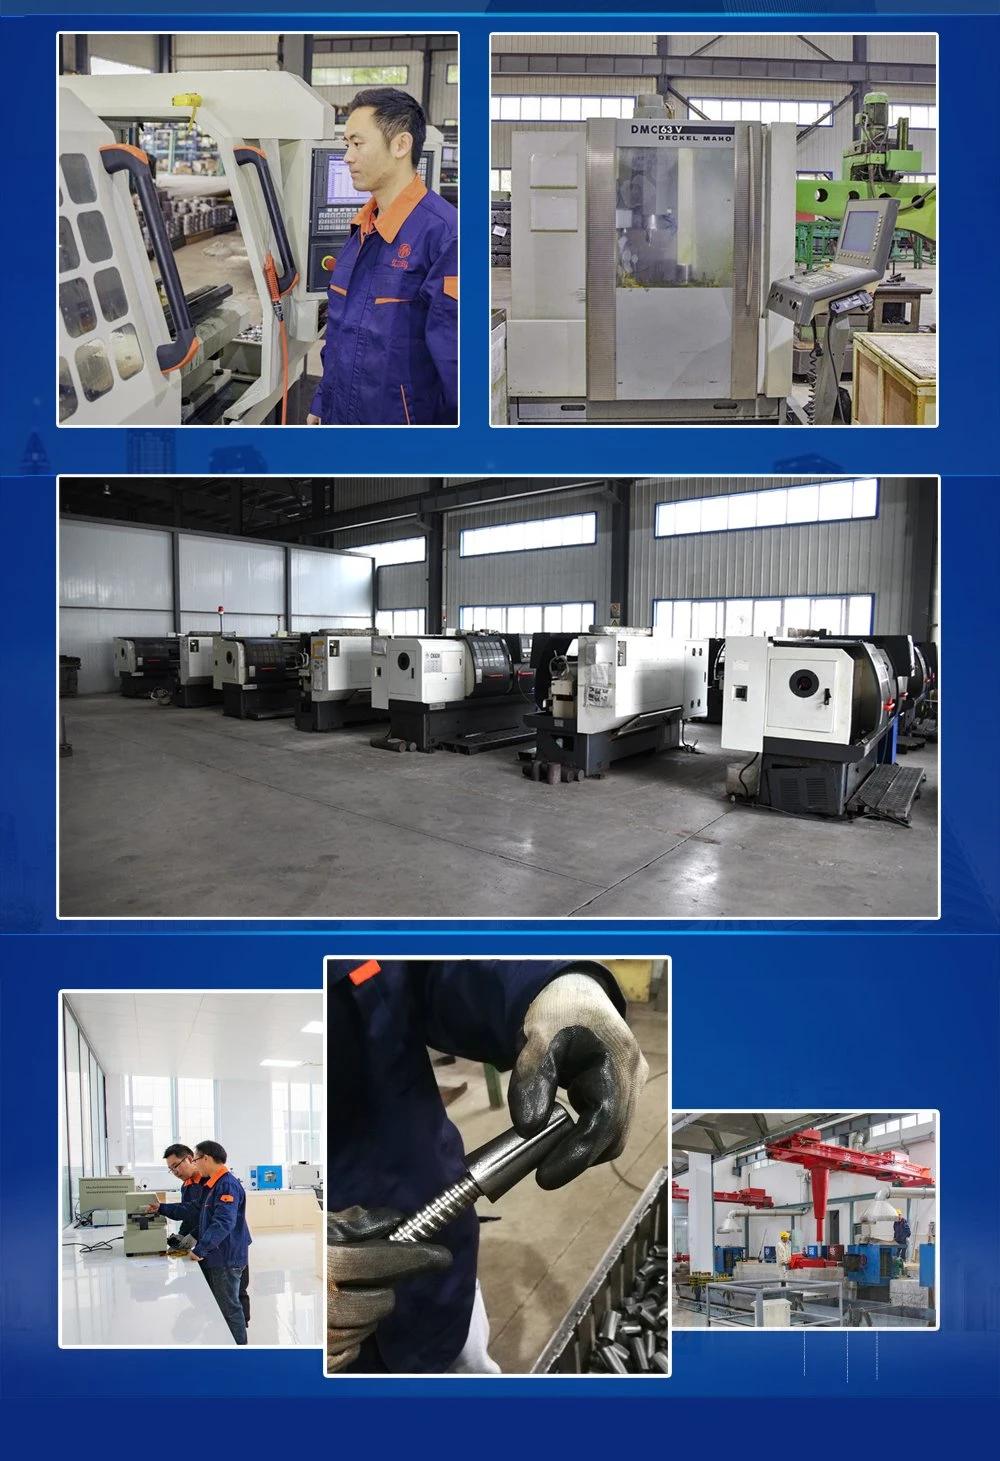 Hydraulic,Gear Box,Auto Part,Nuts,Car,Railway,Construction,Machining,Forging,Pressing,Stamping,Punching,Hot Galvanized,Power Station,Lighting,Hanging System